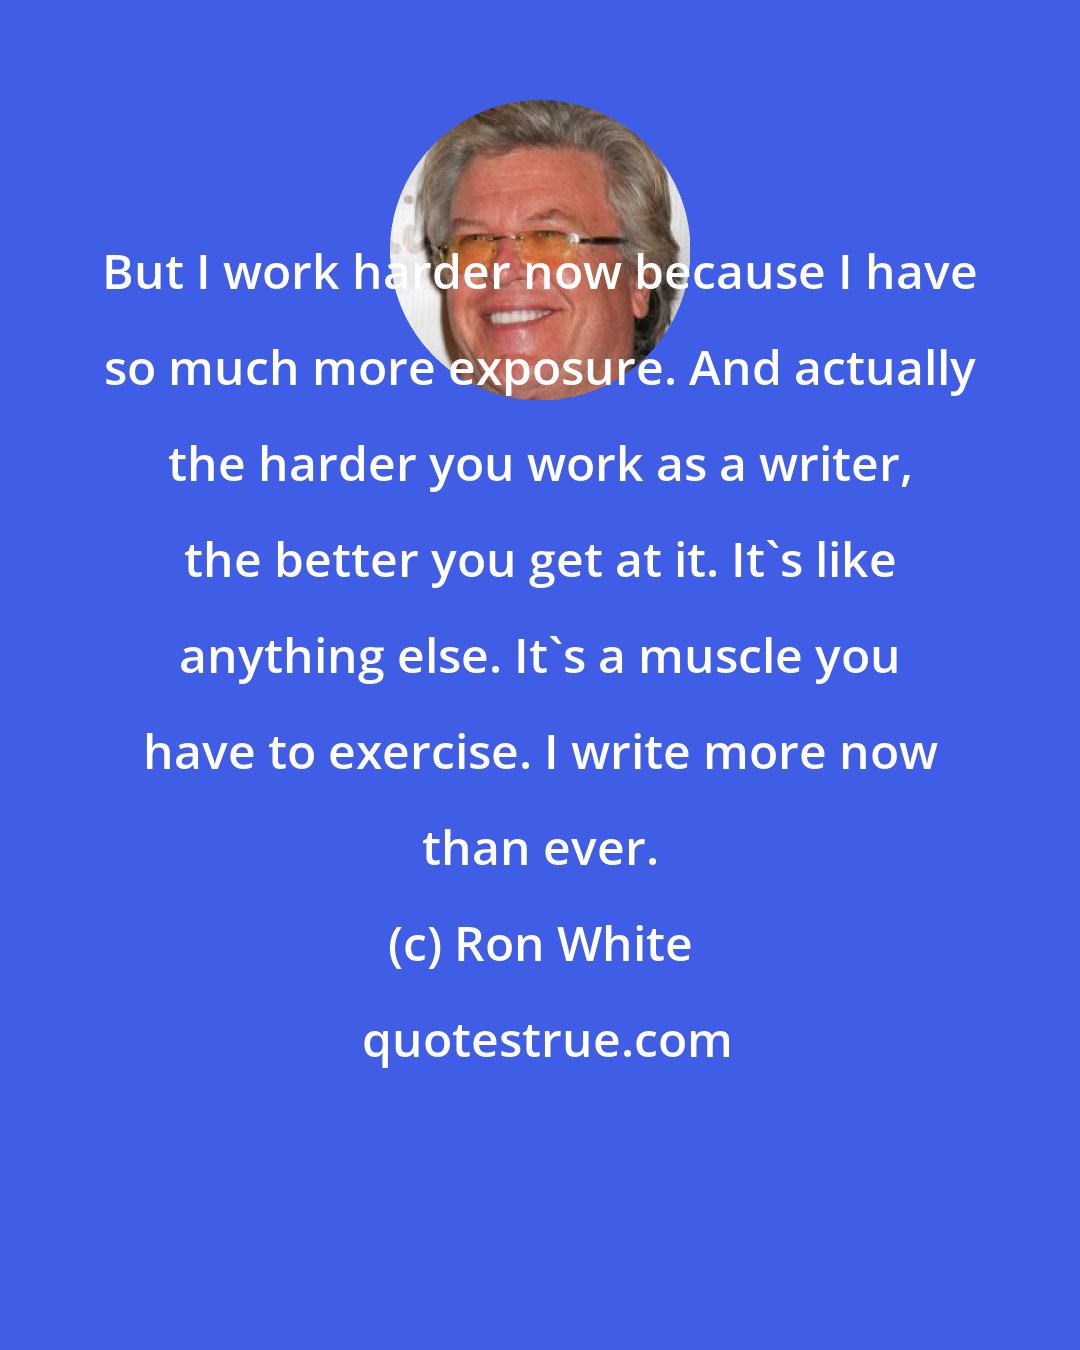 Ron White: But I work harder now because I have so much more exposure. And actually the harder you work as a writer, the better you get at it. It's like anything else. It's a muscle you have to exercise. I write more now than ever.